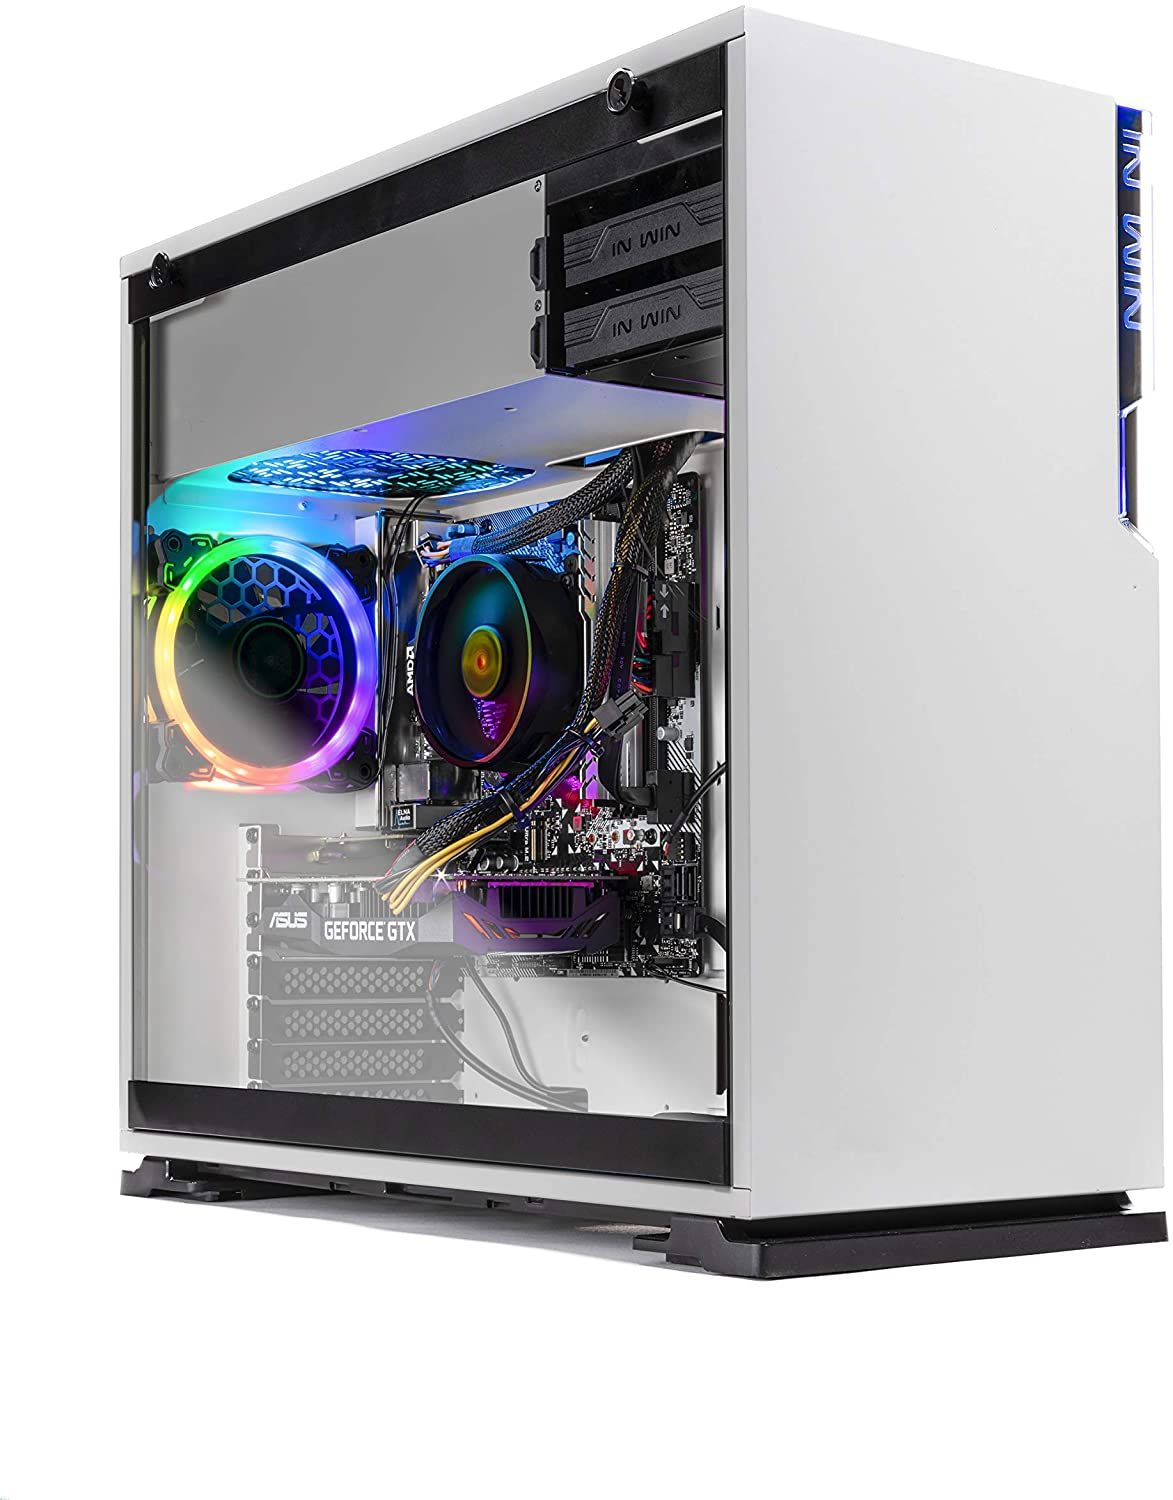 Curved Best Gaming Pc Build 2020 Under $1000 with Wall Mounted Monitor